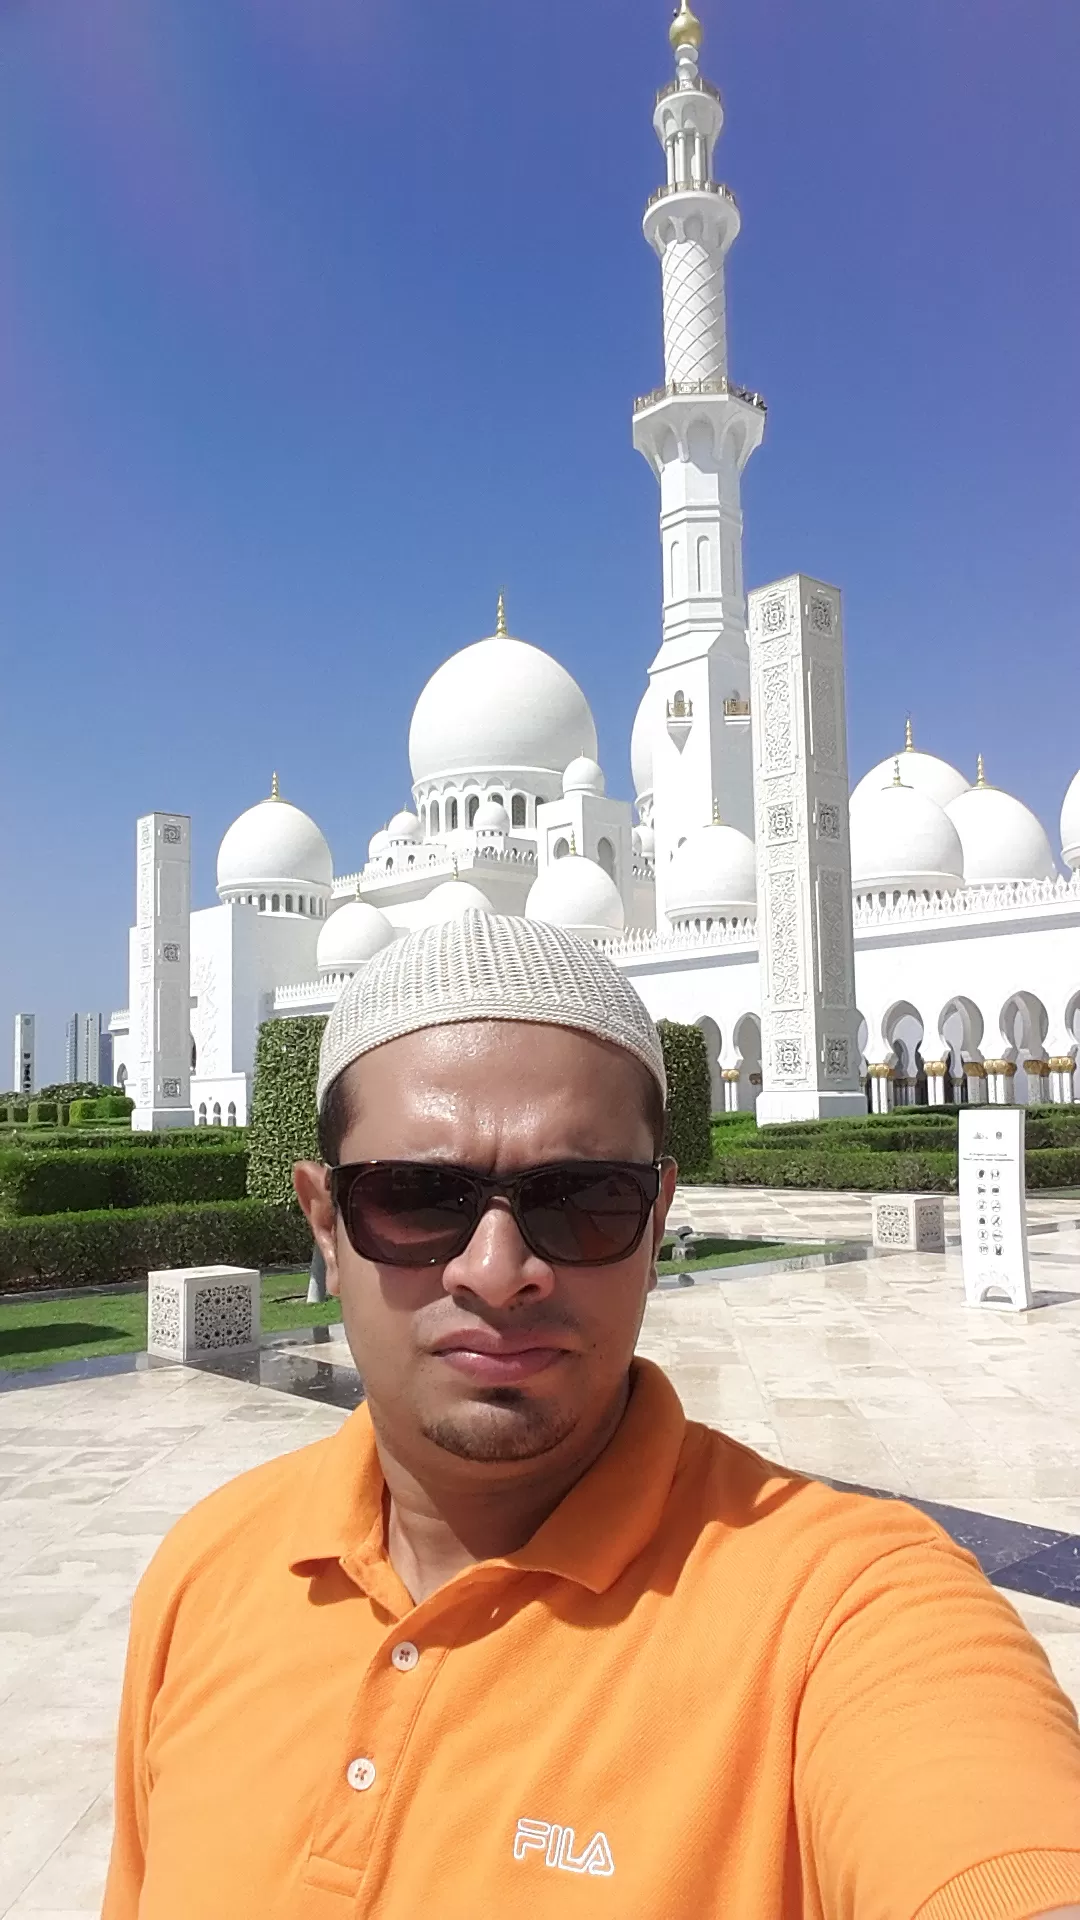 Photo of Mosque Of Sheikh Zayed Bin Sultan the First - 9 - Street - Abu Dhabi - United Arab Emirates By Mohamed Zaheen T